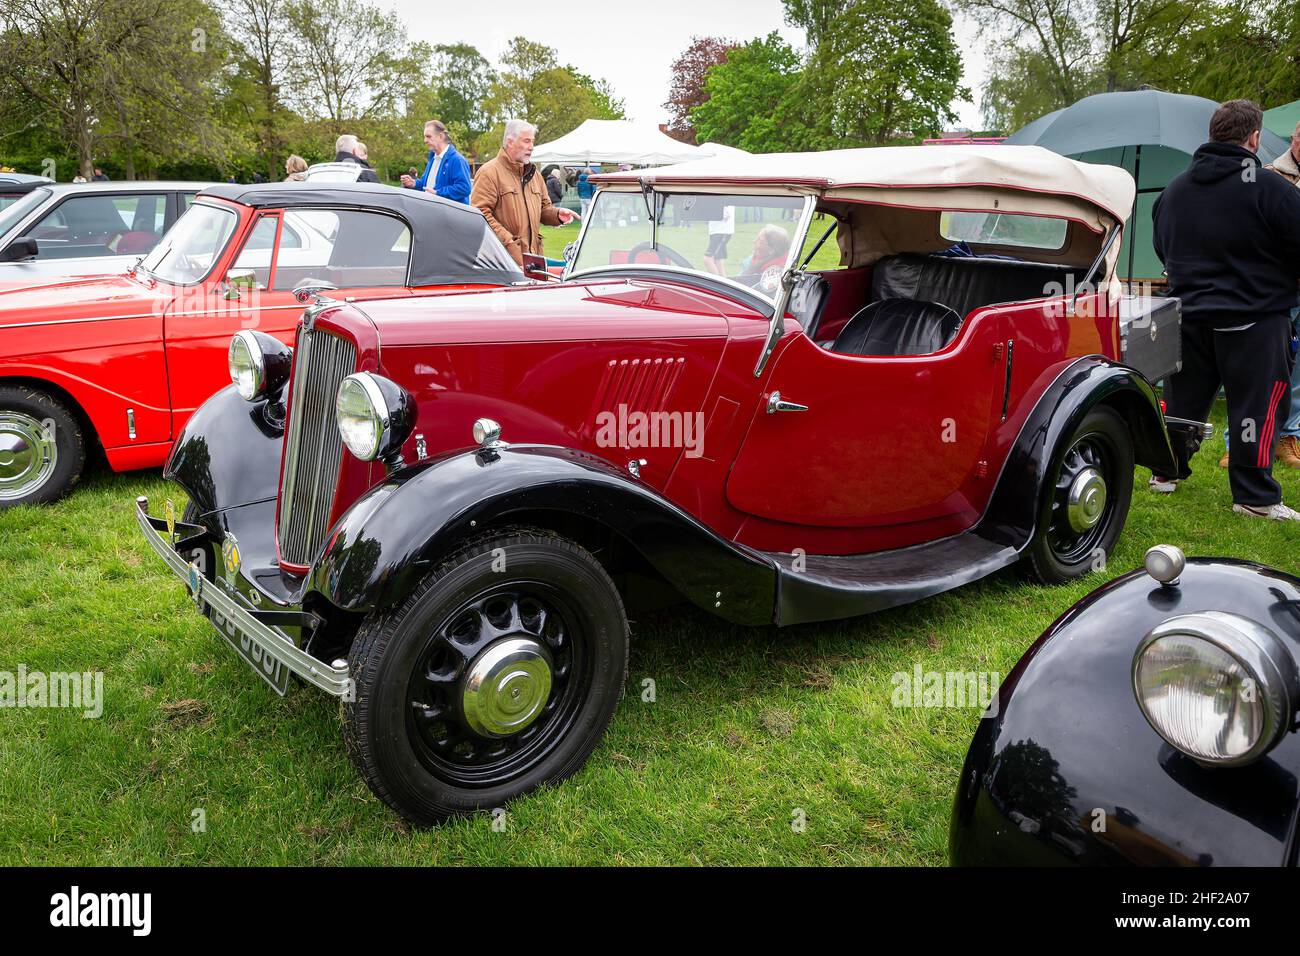 Culcheth Community Day, Cheshire, 2019 where stalls circled a collection of vintage vehicles restored by enthusiasts and viewed by the public Stock Photo